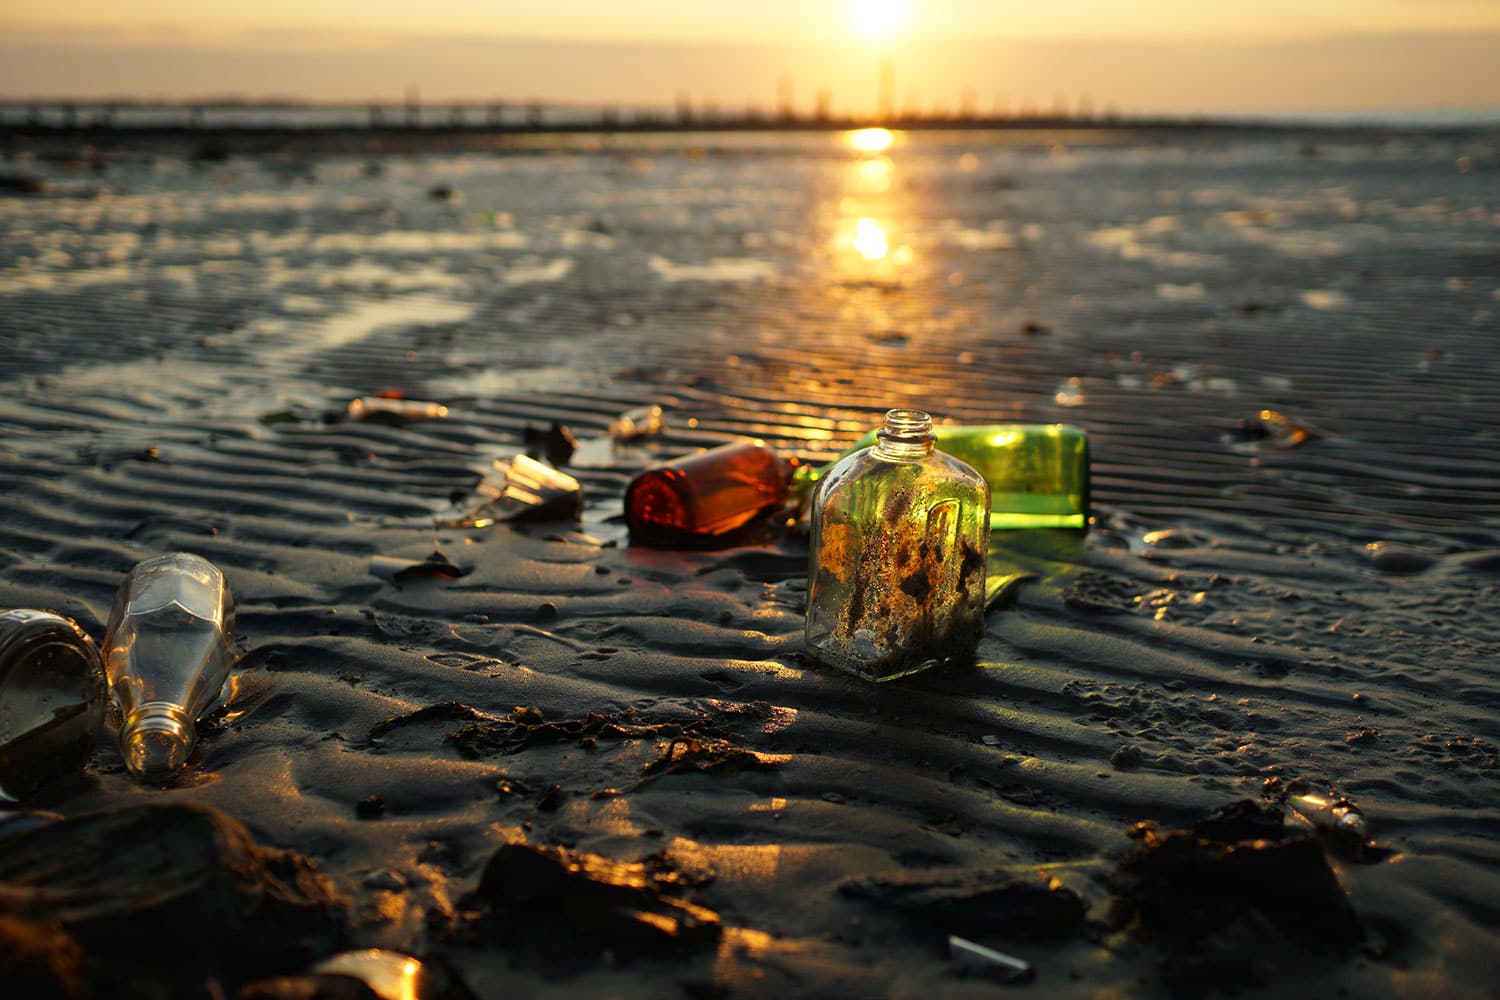 Sunset Rays Passing Through Old Glass Bottles On The Beach